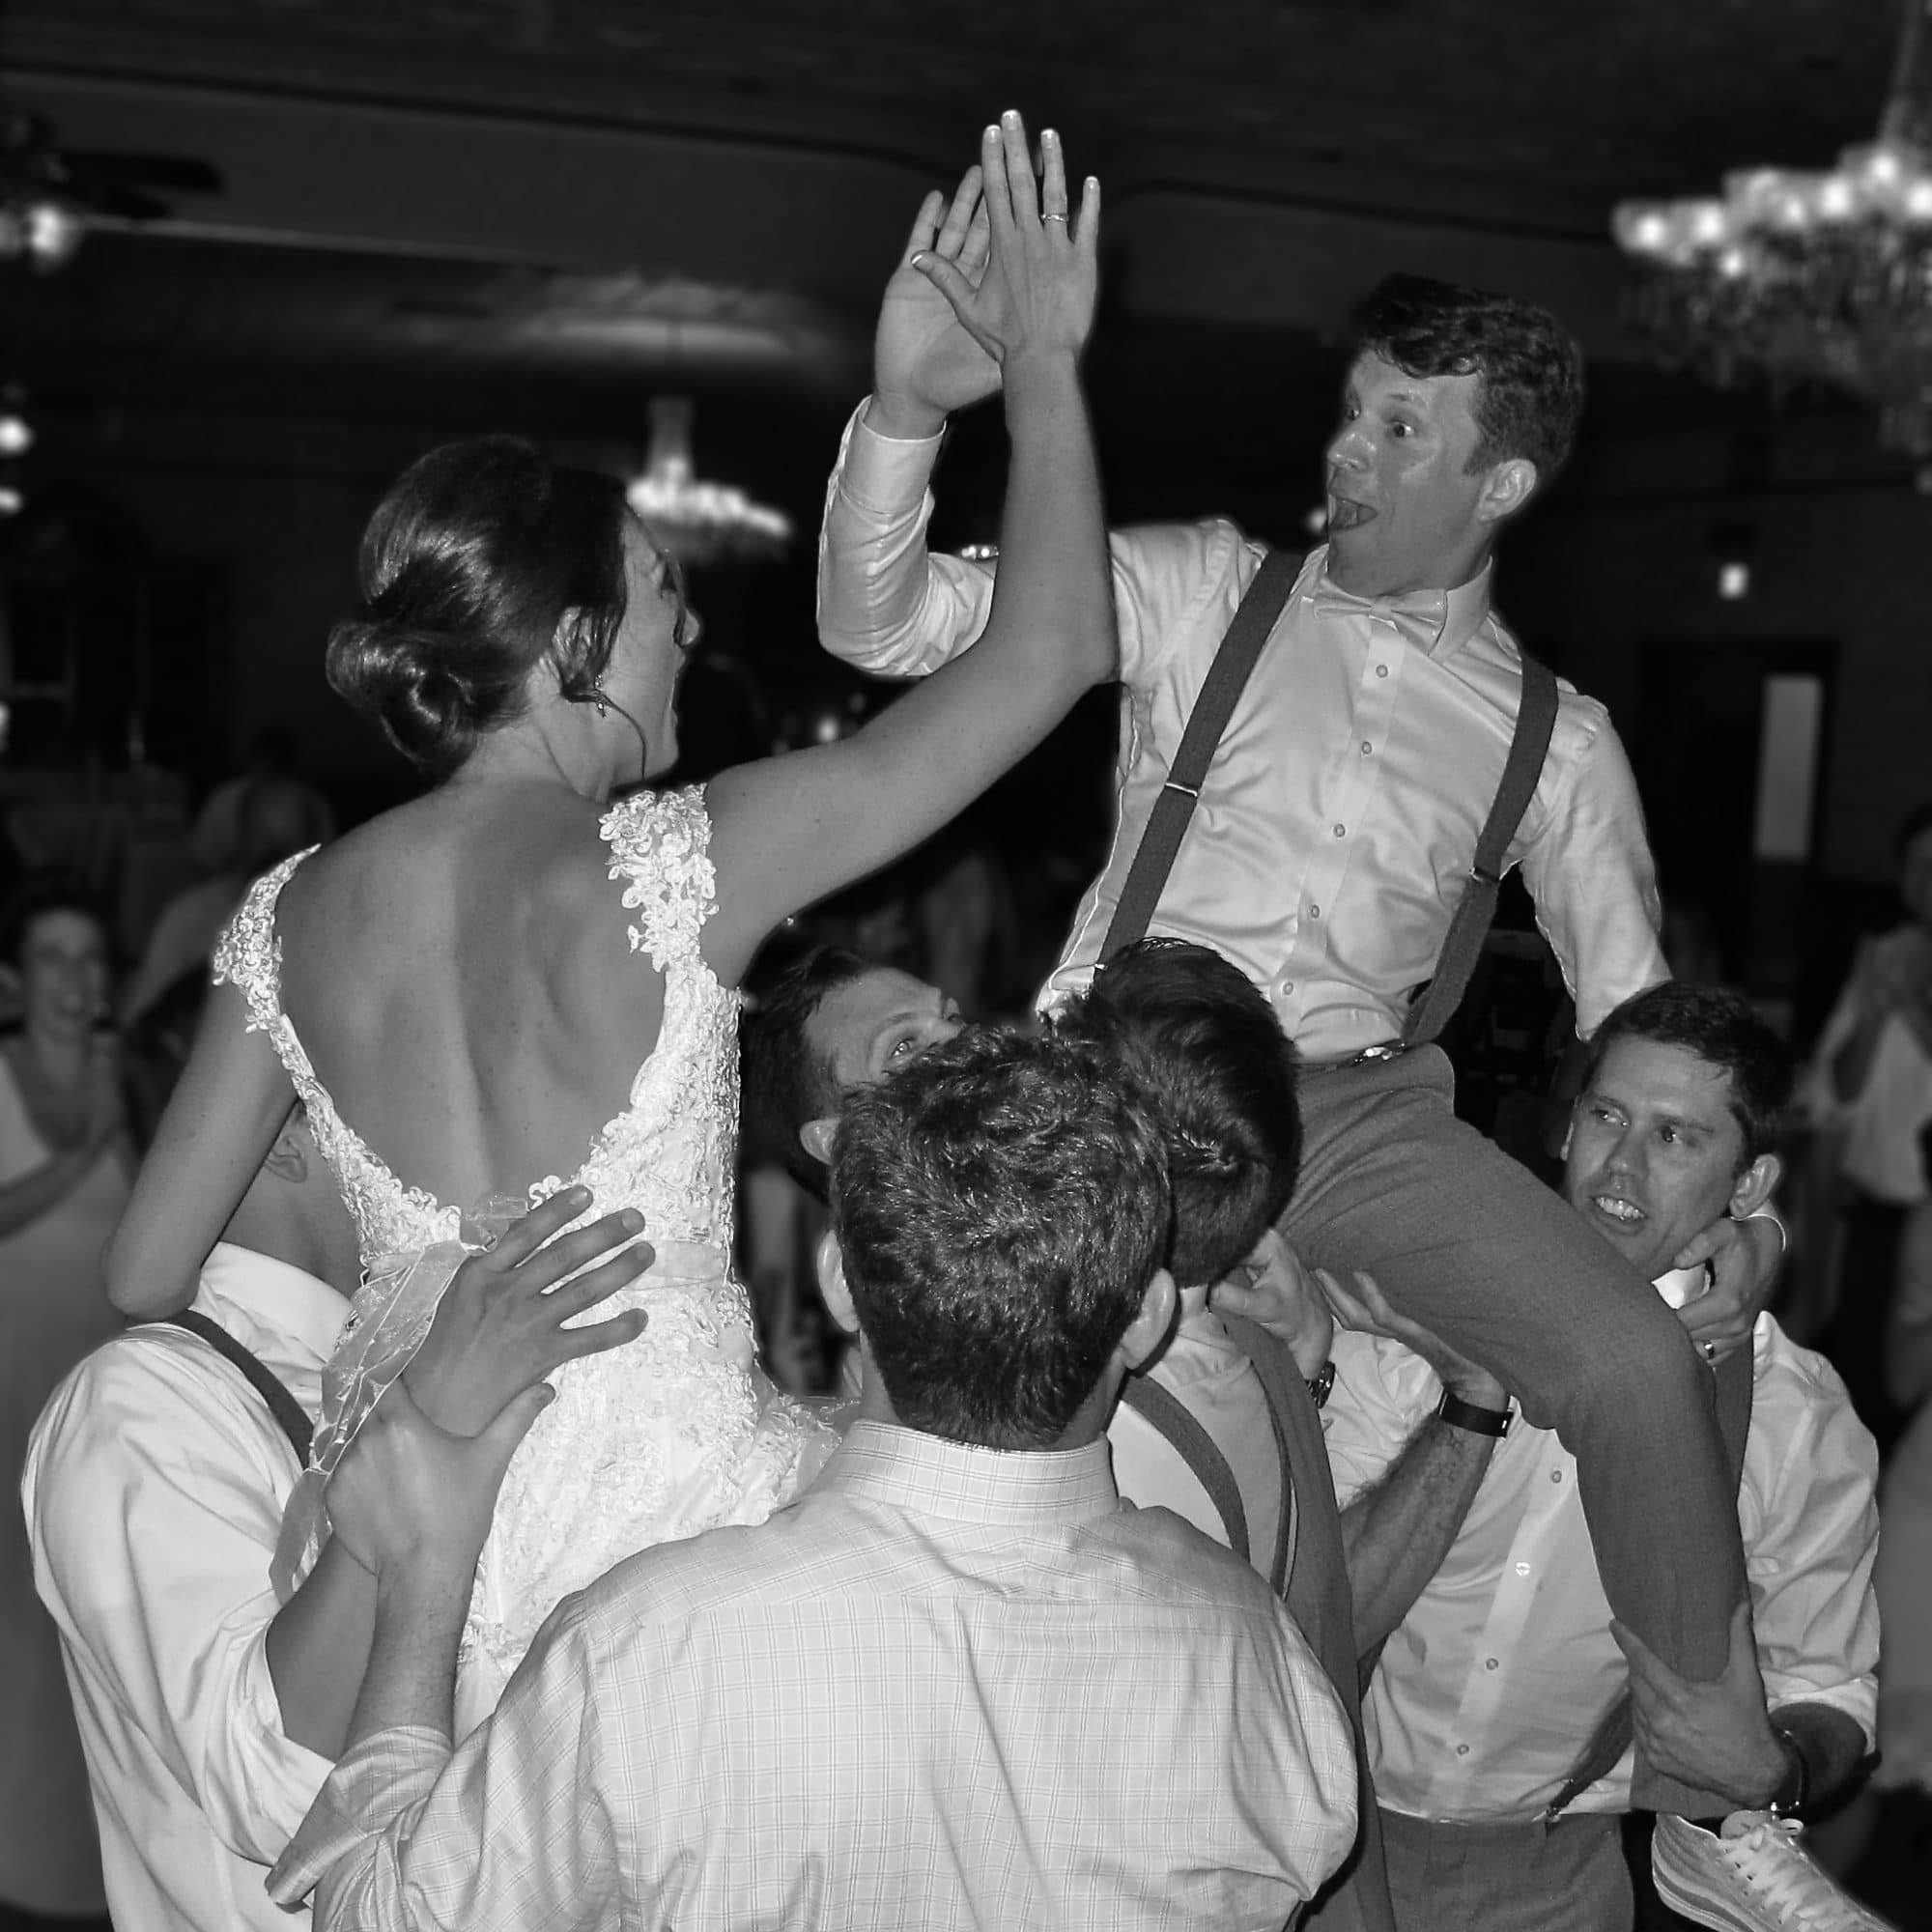 Classic-Disc-Jockeys-Bride and Groom giving high five while being lifted up by groomsmen at reception